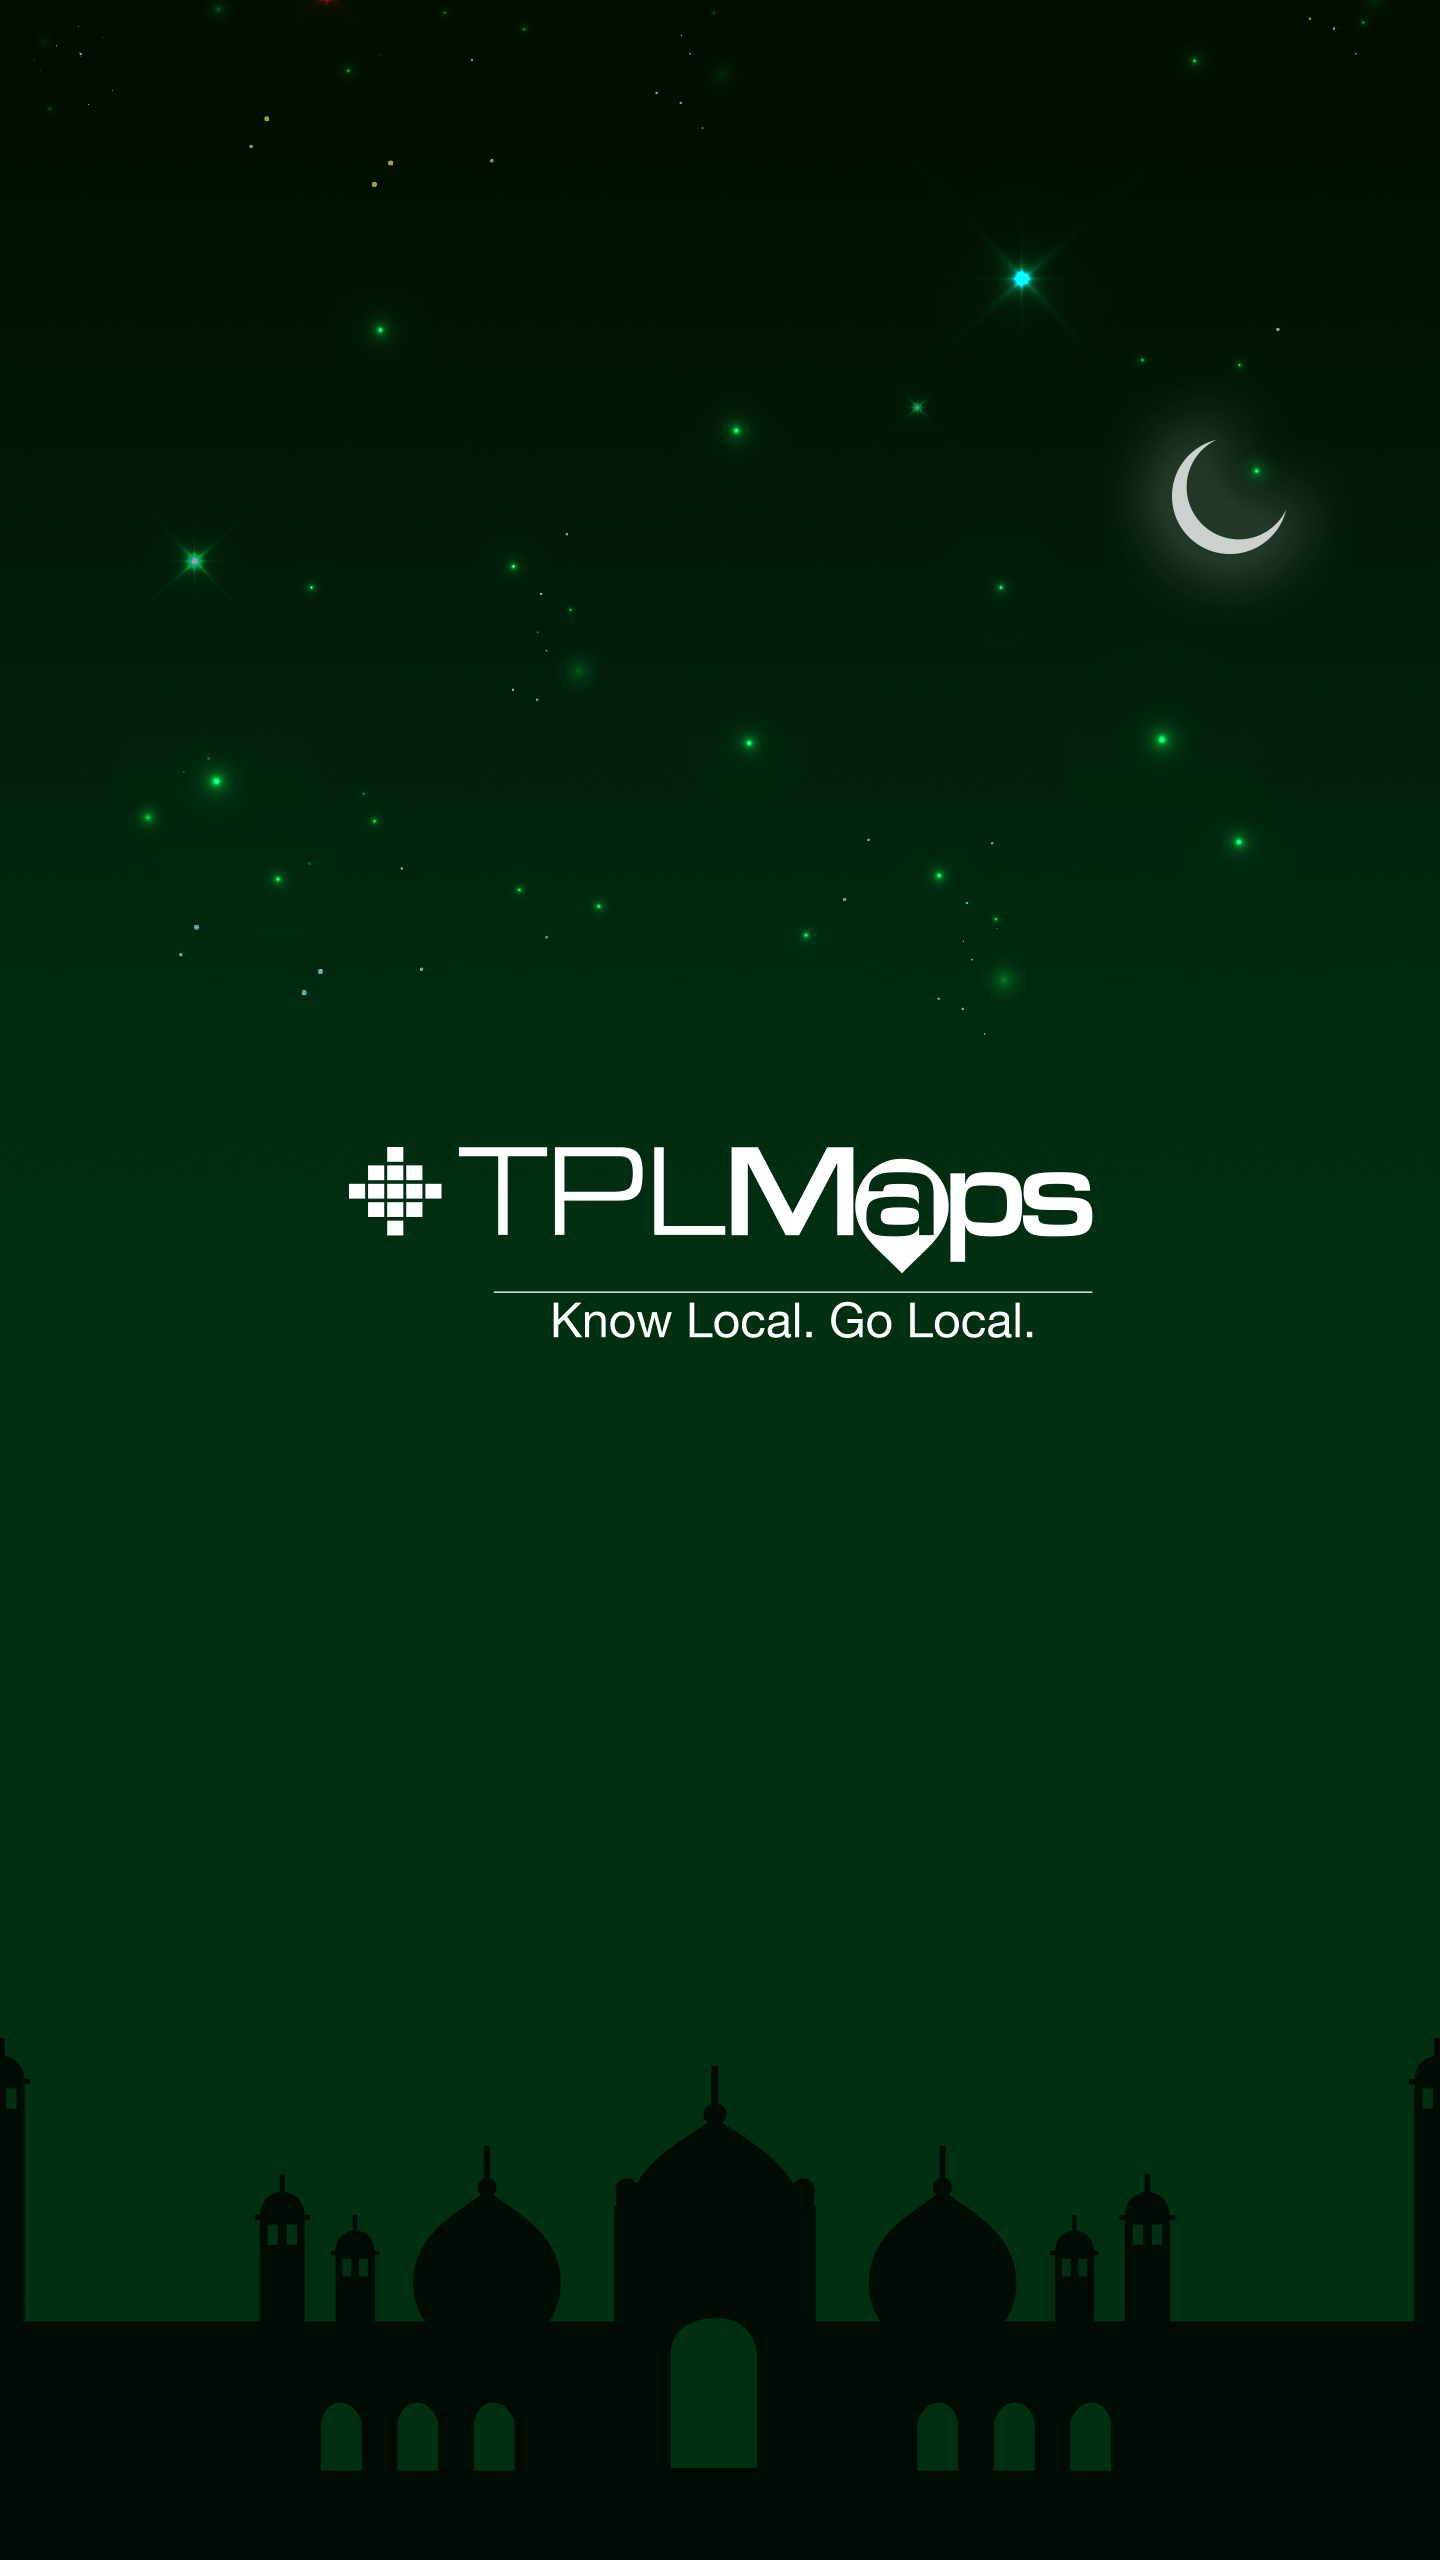 TPL Maps Welcomes The Holy Month Of Ramadan With Localized Features